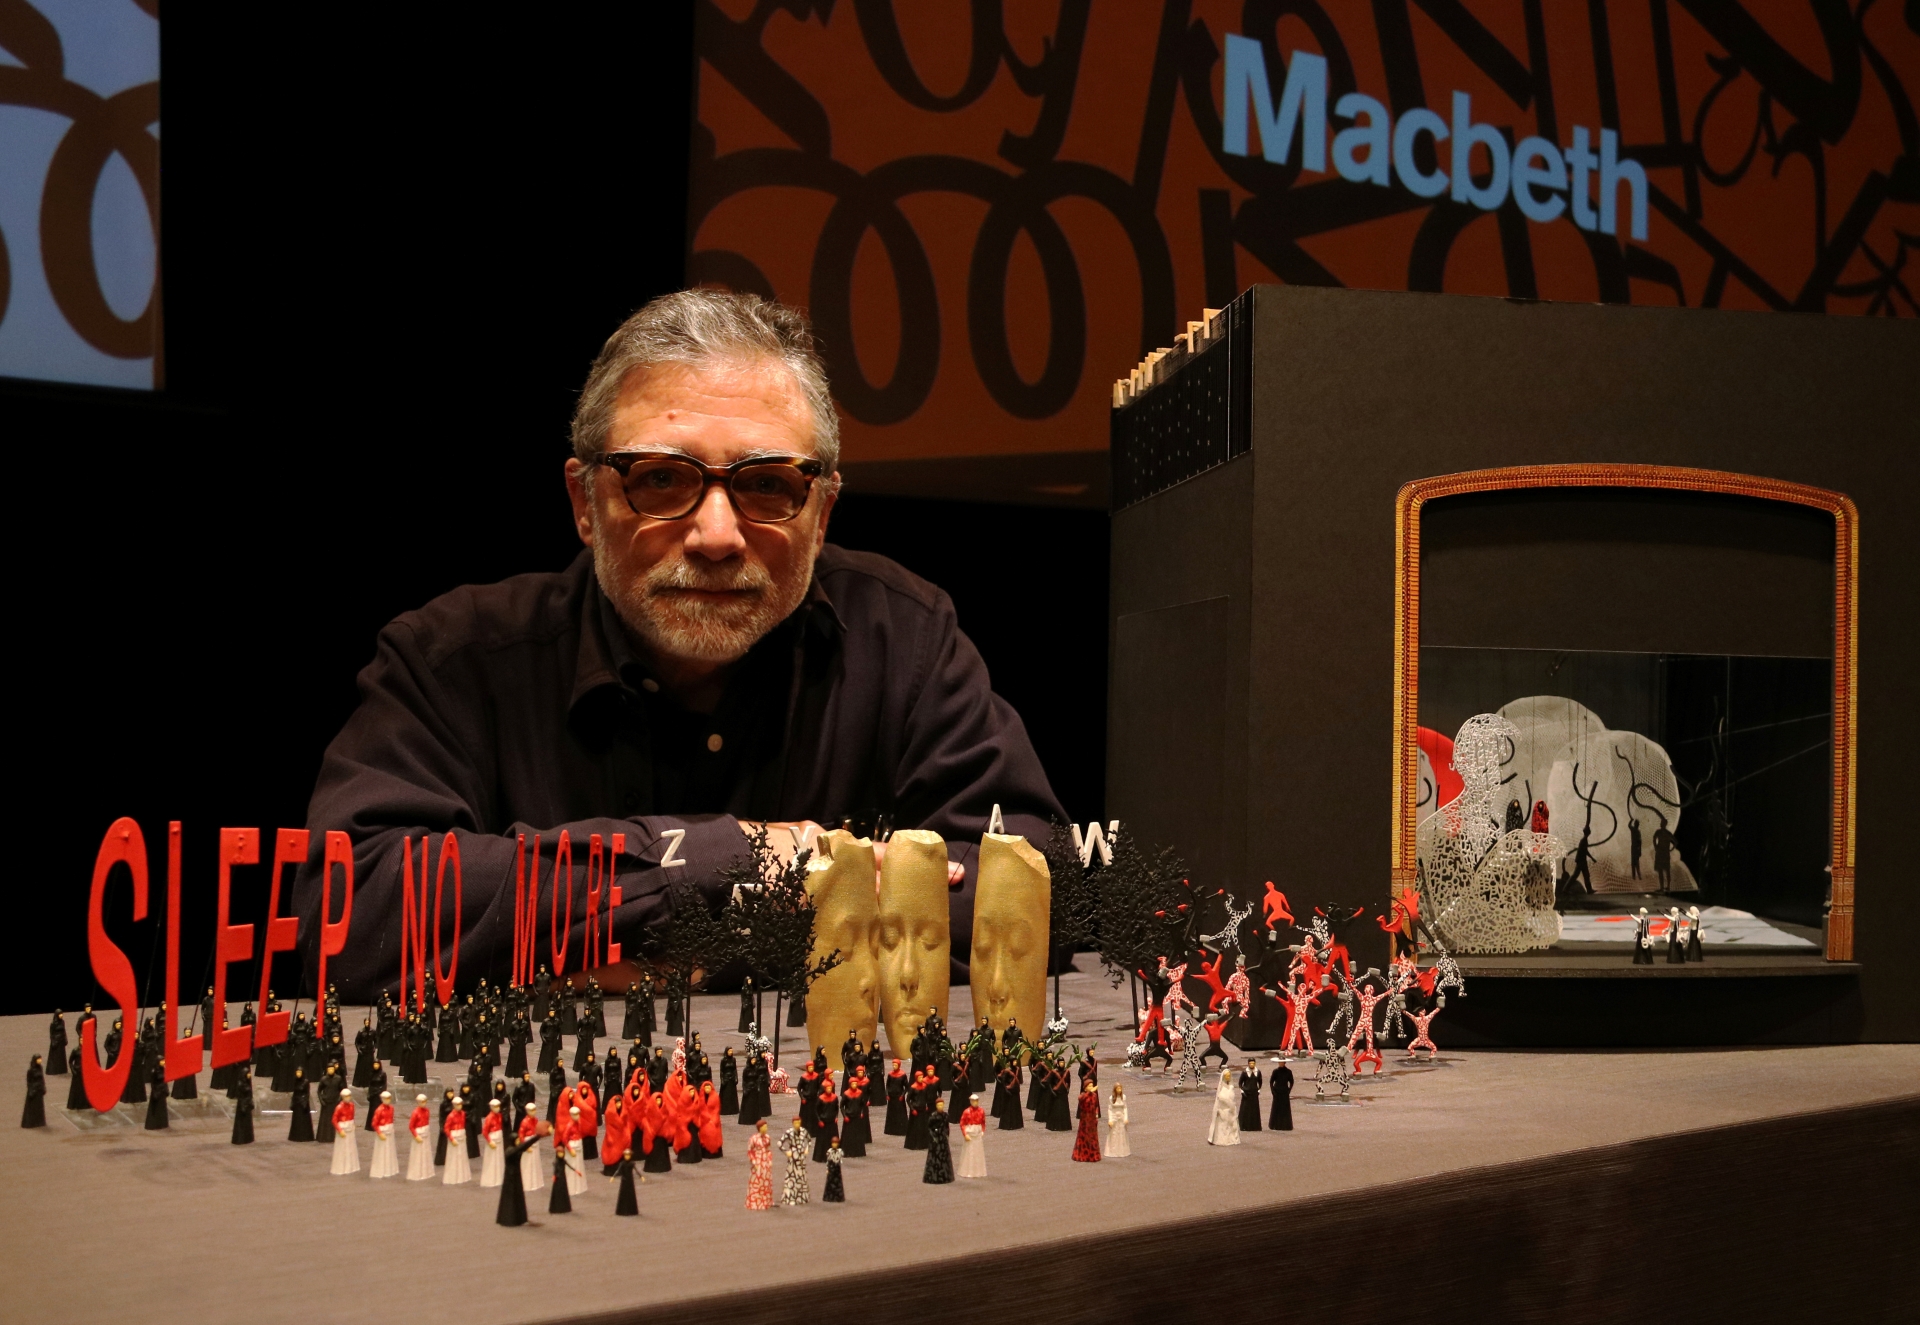 Catalan sculptor Jaume Plensa with his Macbeth opera proposal on May 9, 2022 (by Pau Cortina)